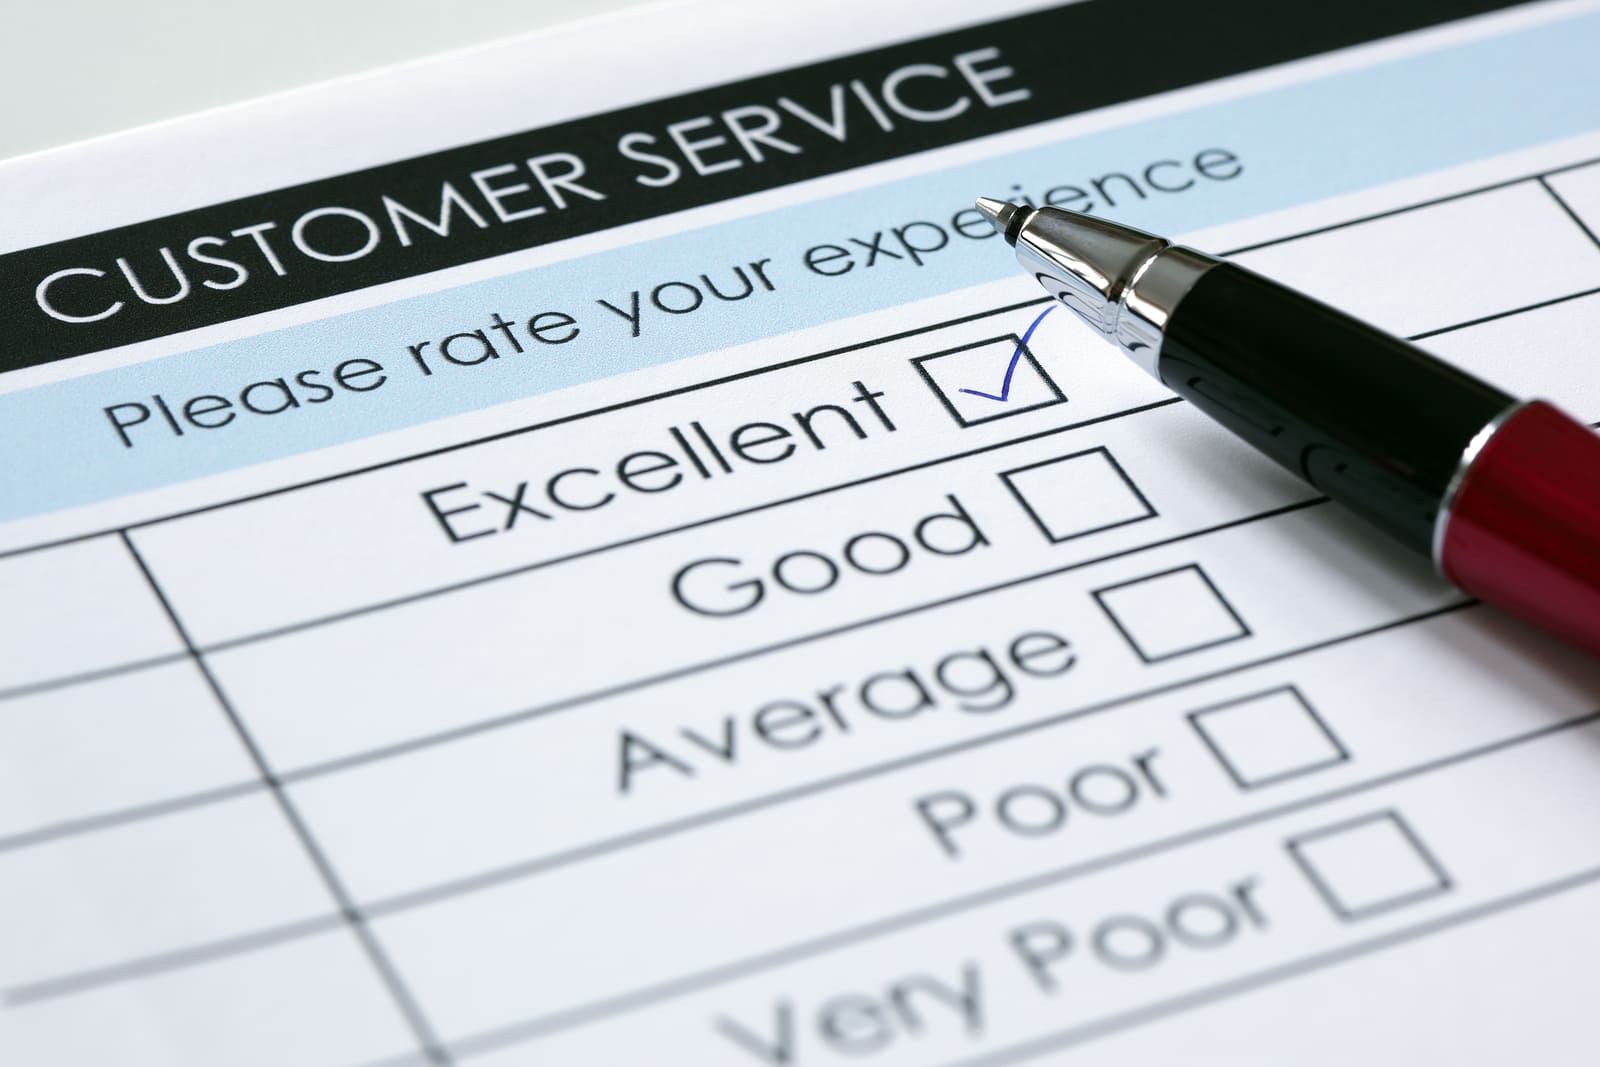 Digital Customer Service 101: Excellent Customer Service Guide for Your Dropshipping Business